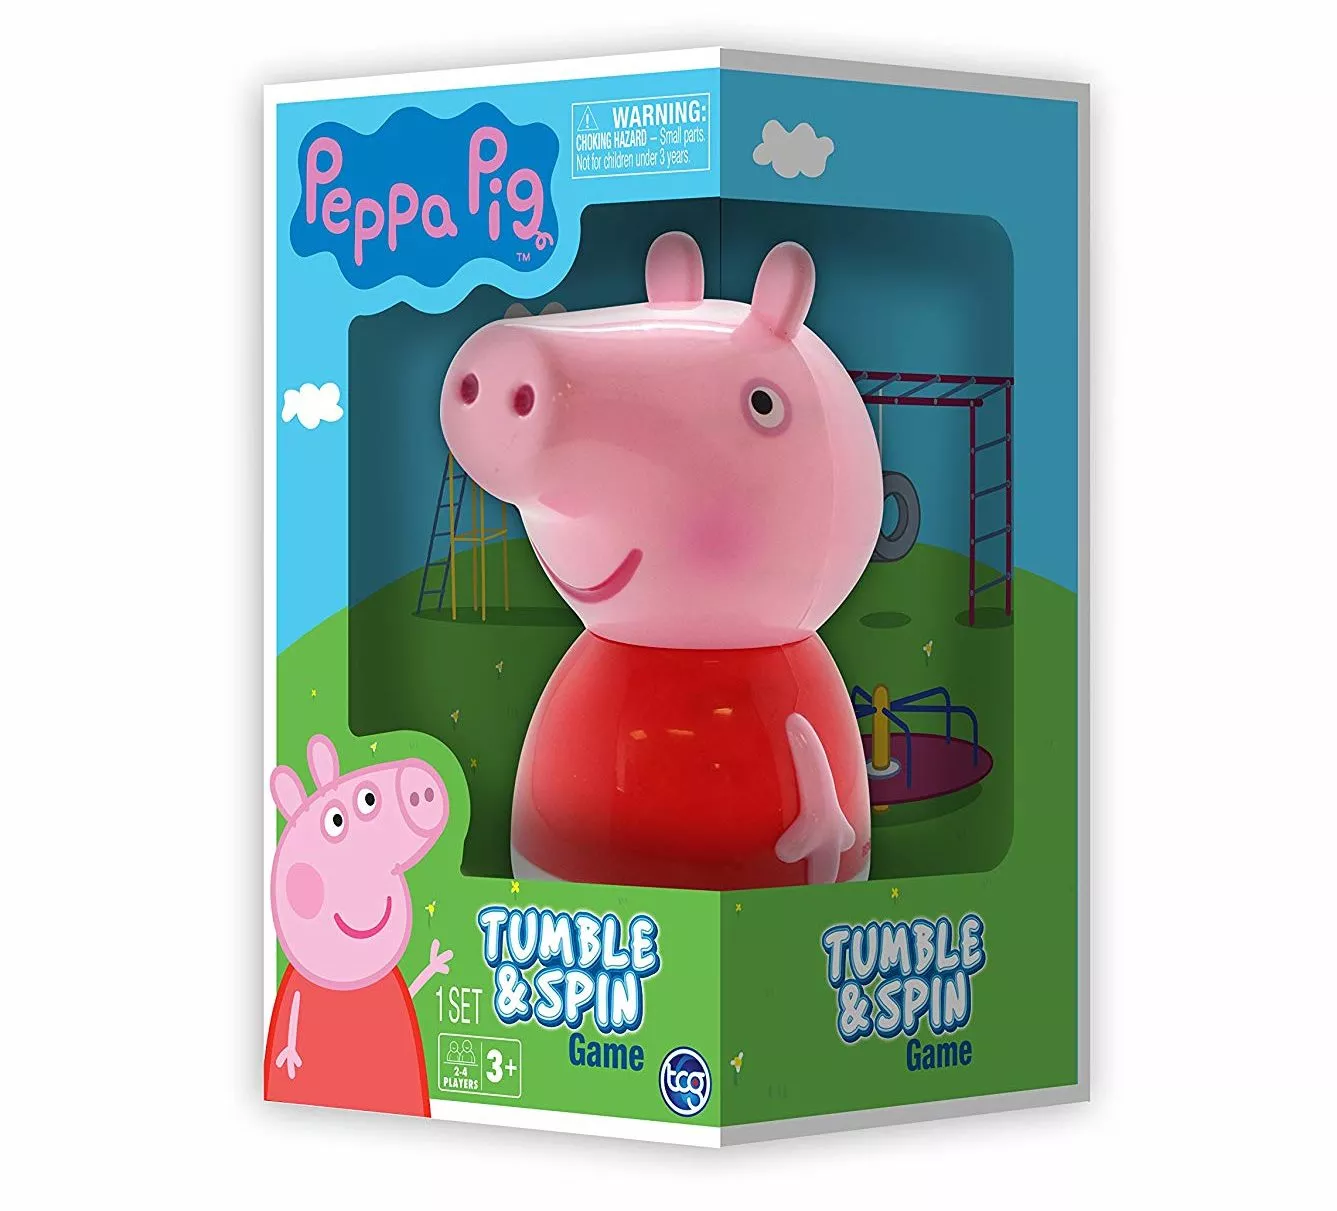 New Peppa Pig Toys & Gifts 2023: Tumble and Spin Game 2023